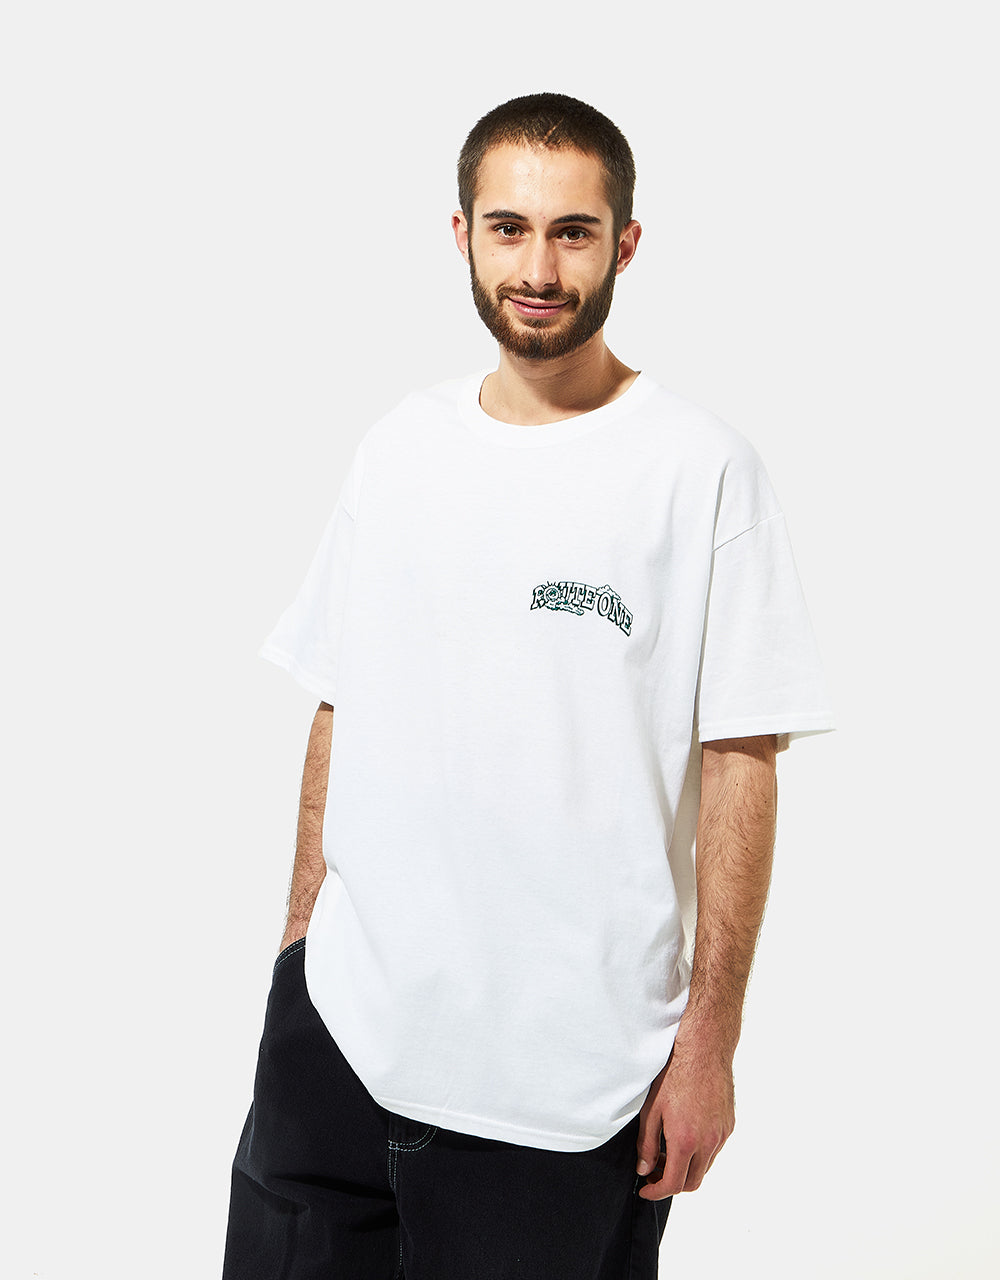 Route One Construction T-Shirt - White